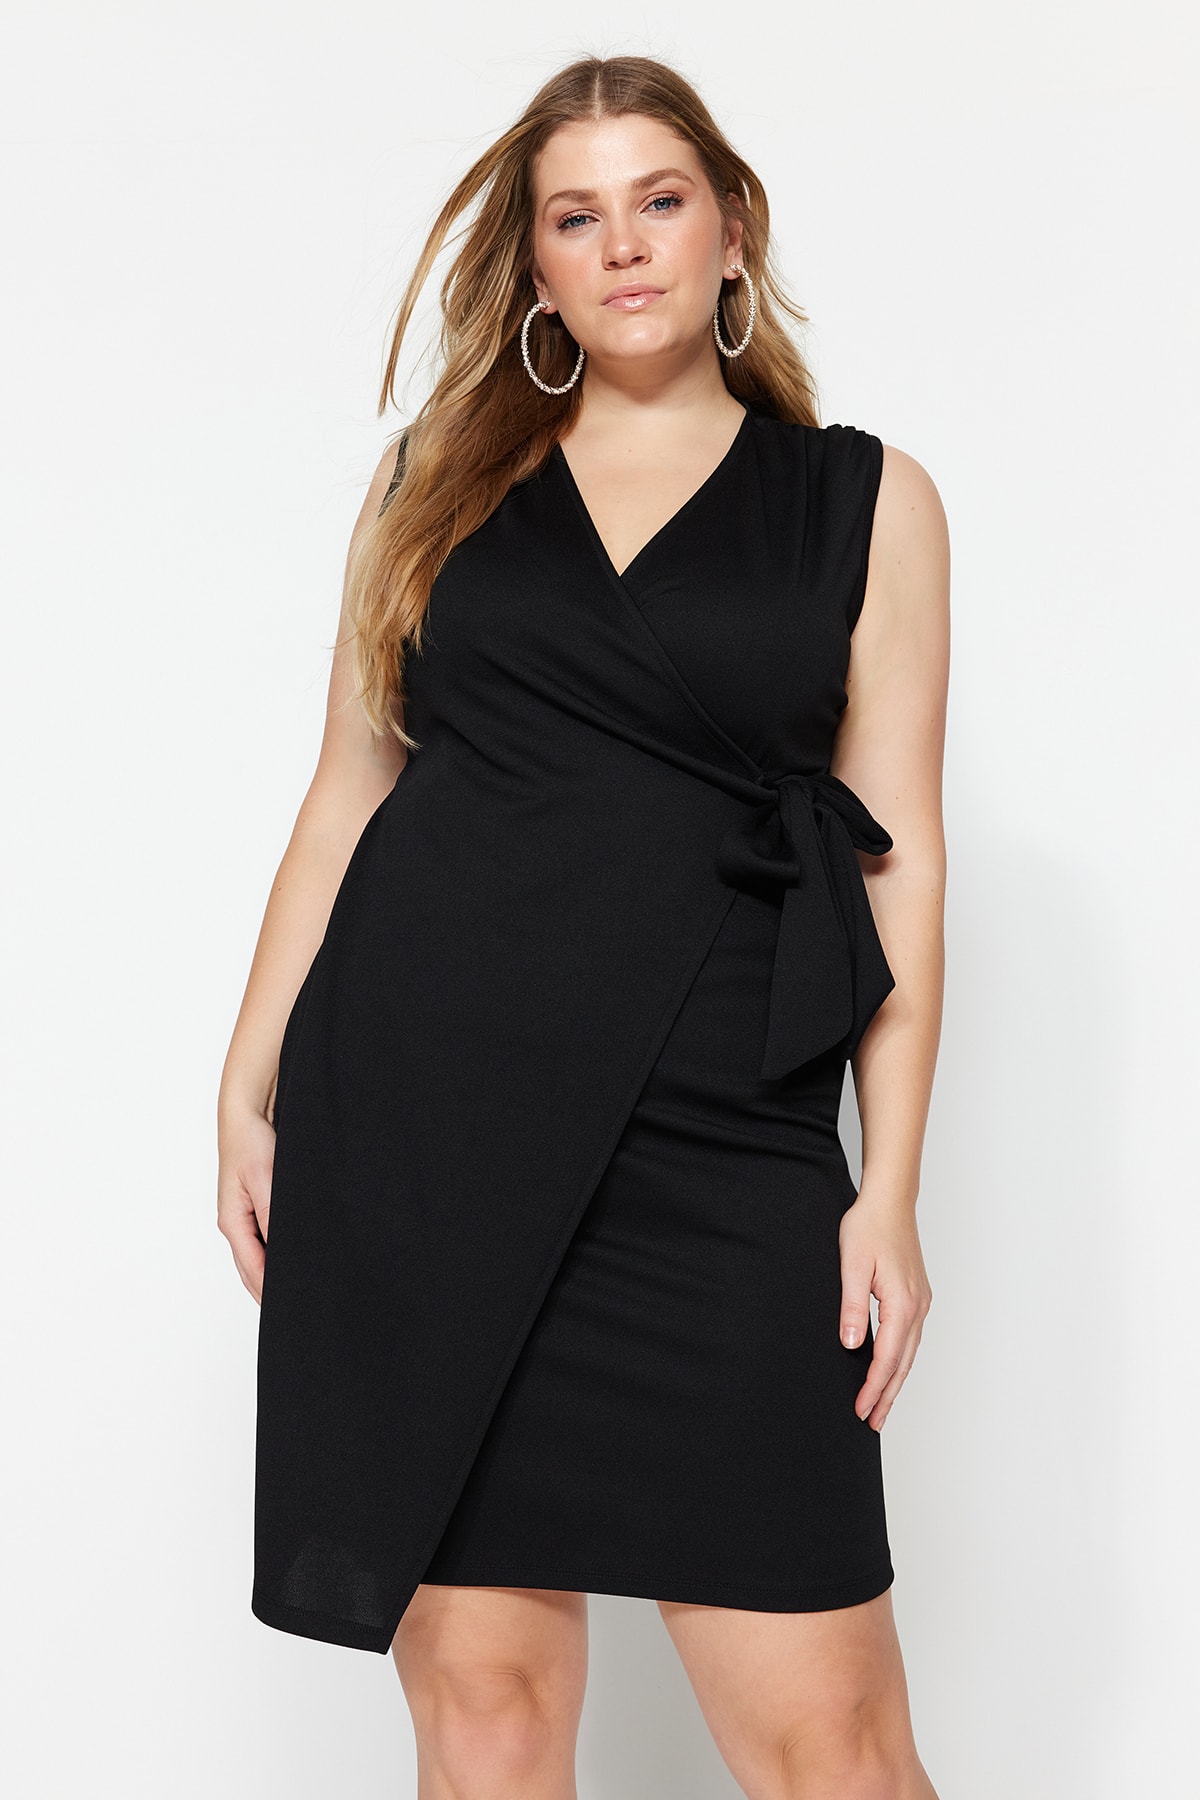 Trendyol Plus Size Black Double Breasted Tie Knitted Dress